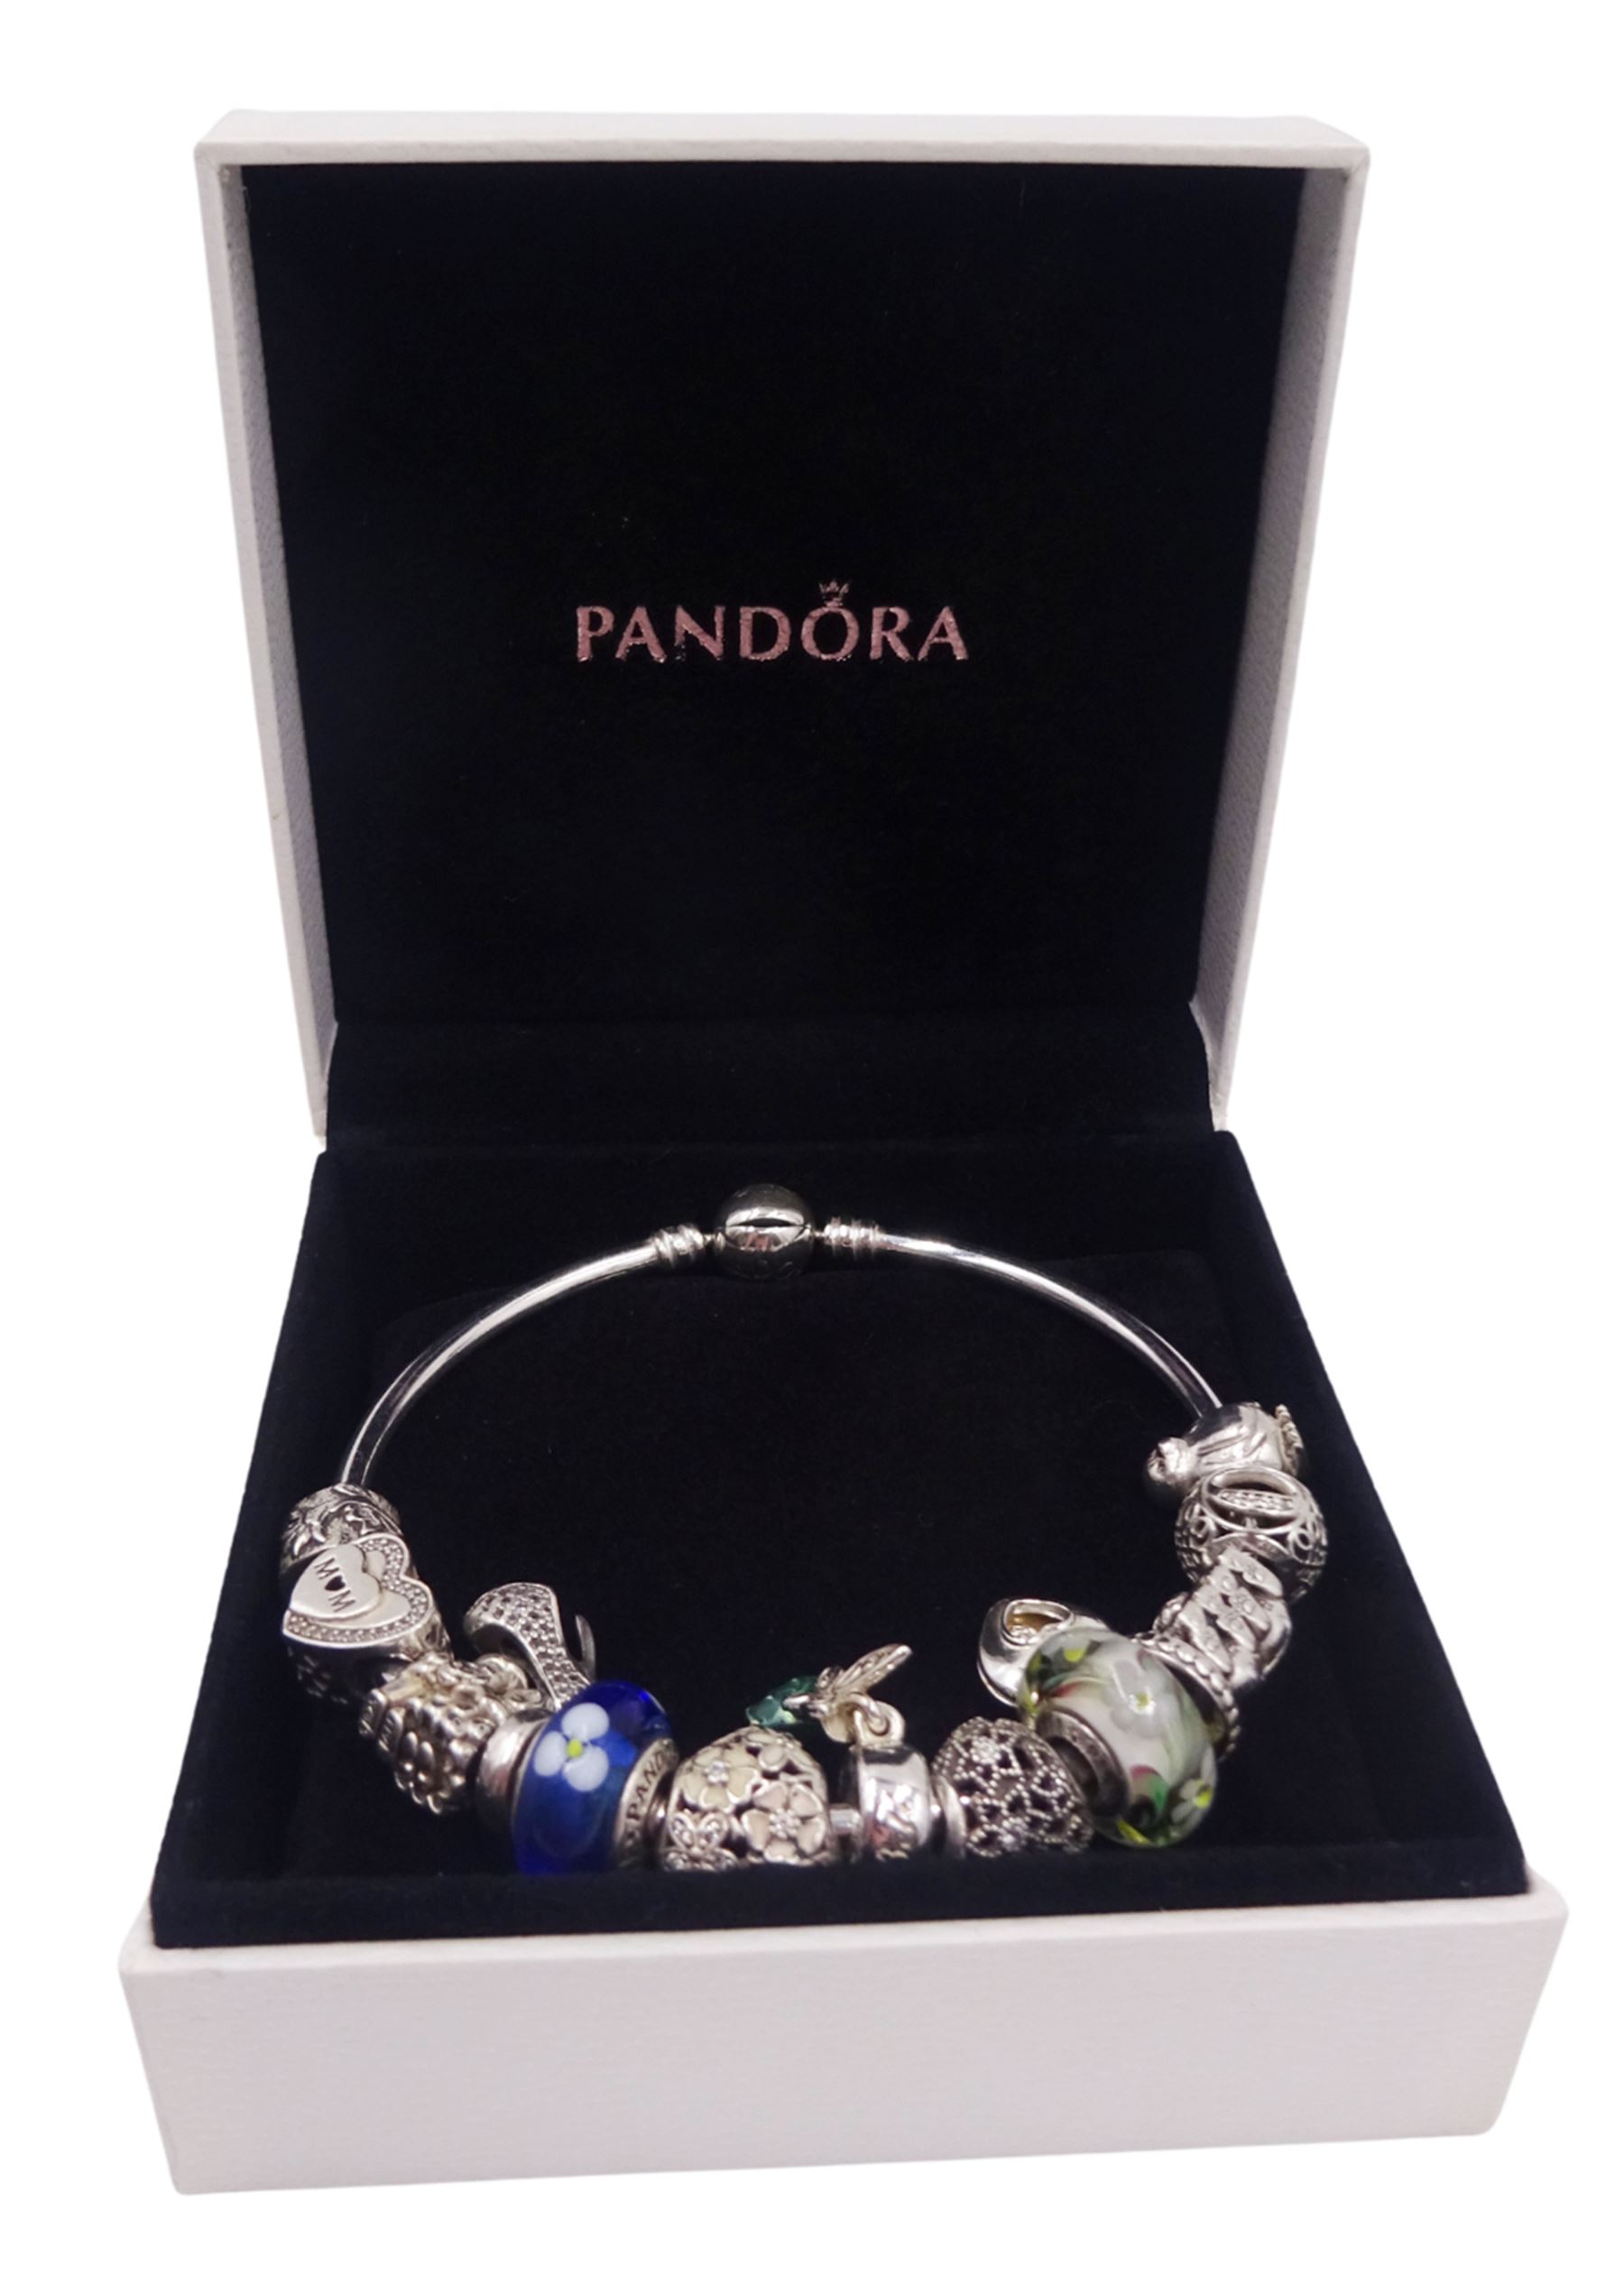 Pandora silver bracelet with a Disney Tinker Bell charm and twelve other Pandora charms - Image 2 of 2